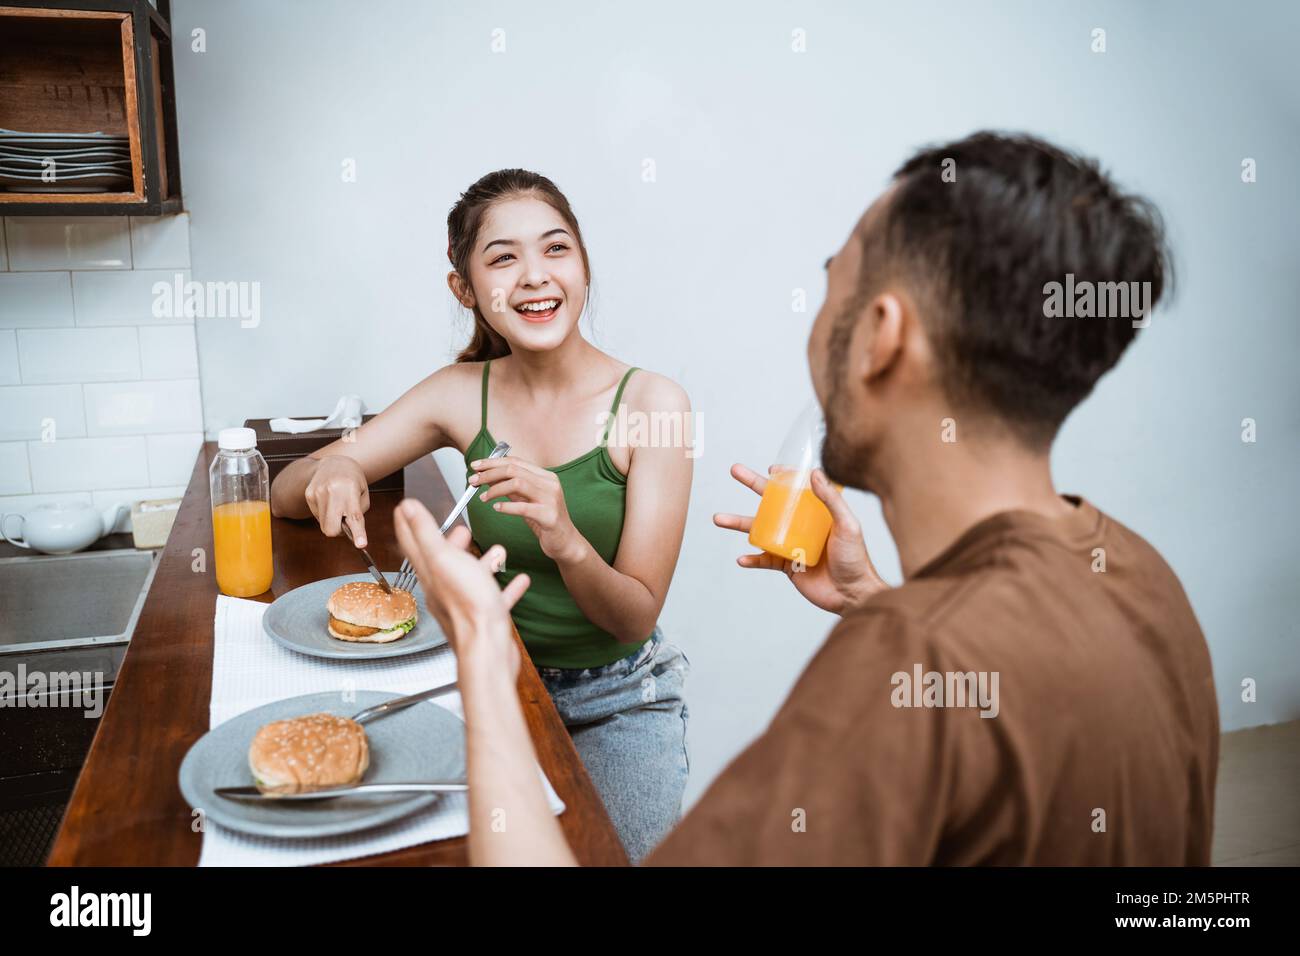 attractive young girl chatting with young man at breakfast Stock Photo